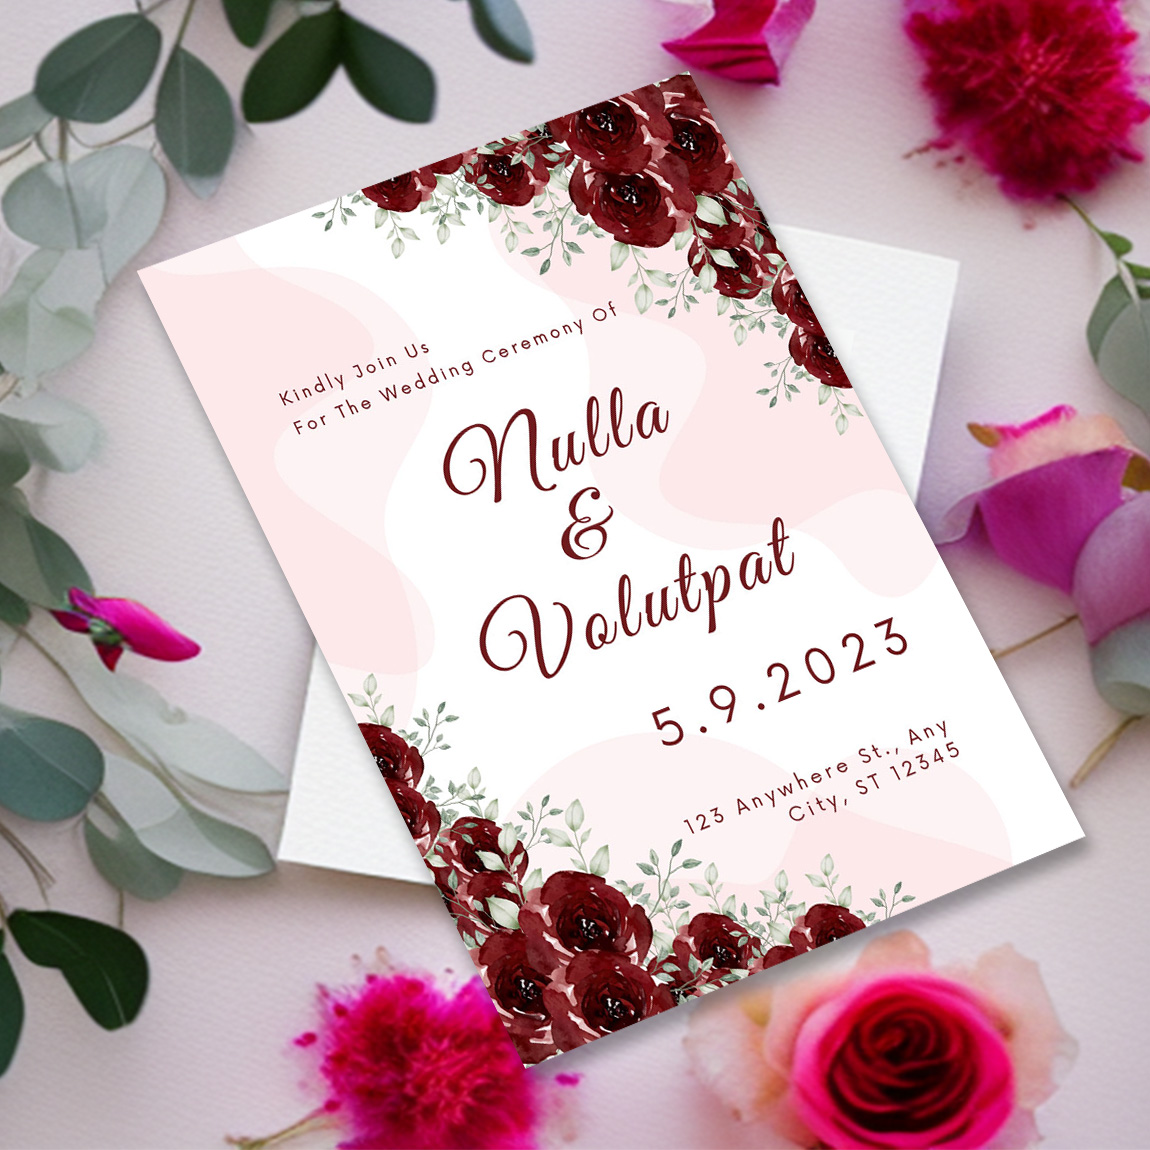 Image of charming wedding invitation card in pink colors and flowers.